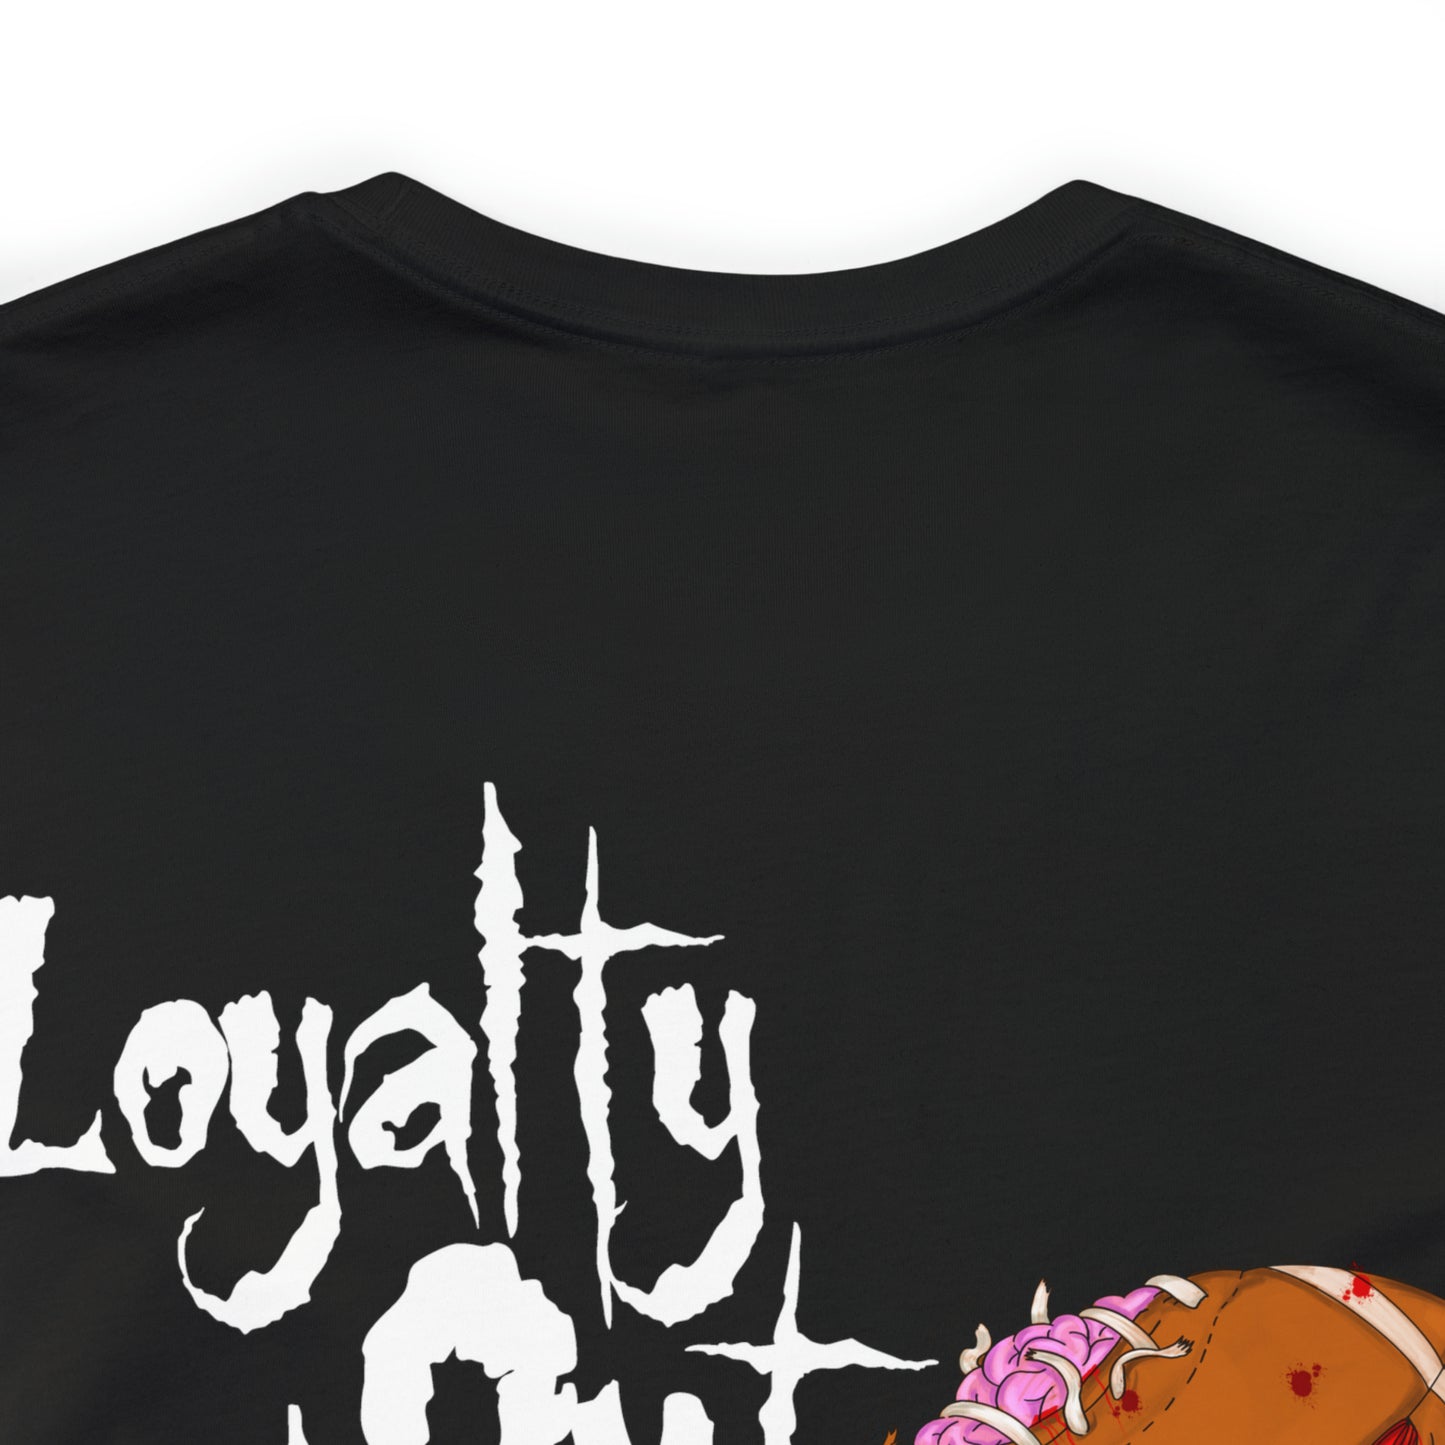 Antoine Williams: Loyalty Out Values Everything Tee